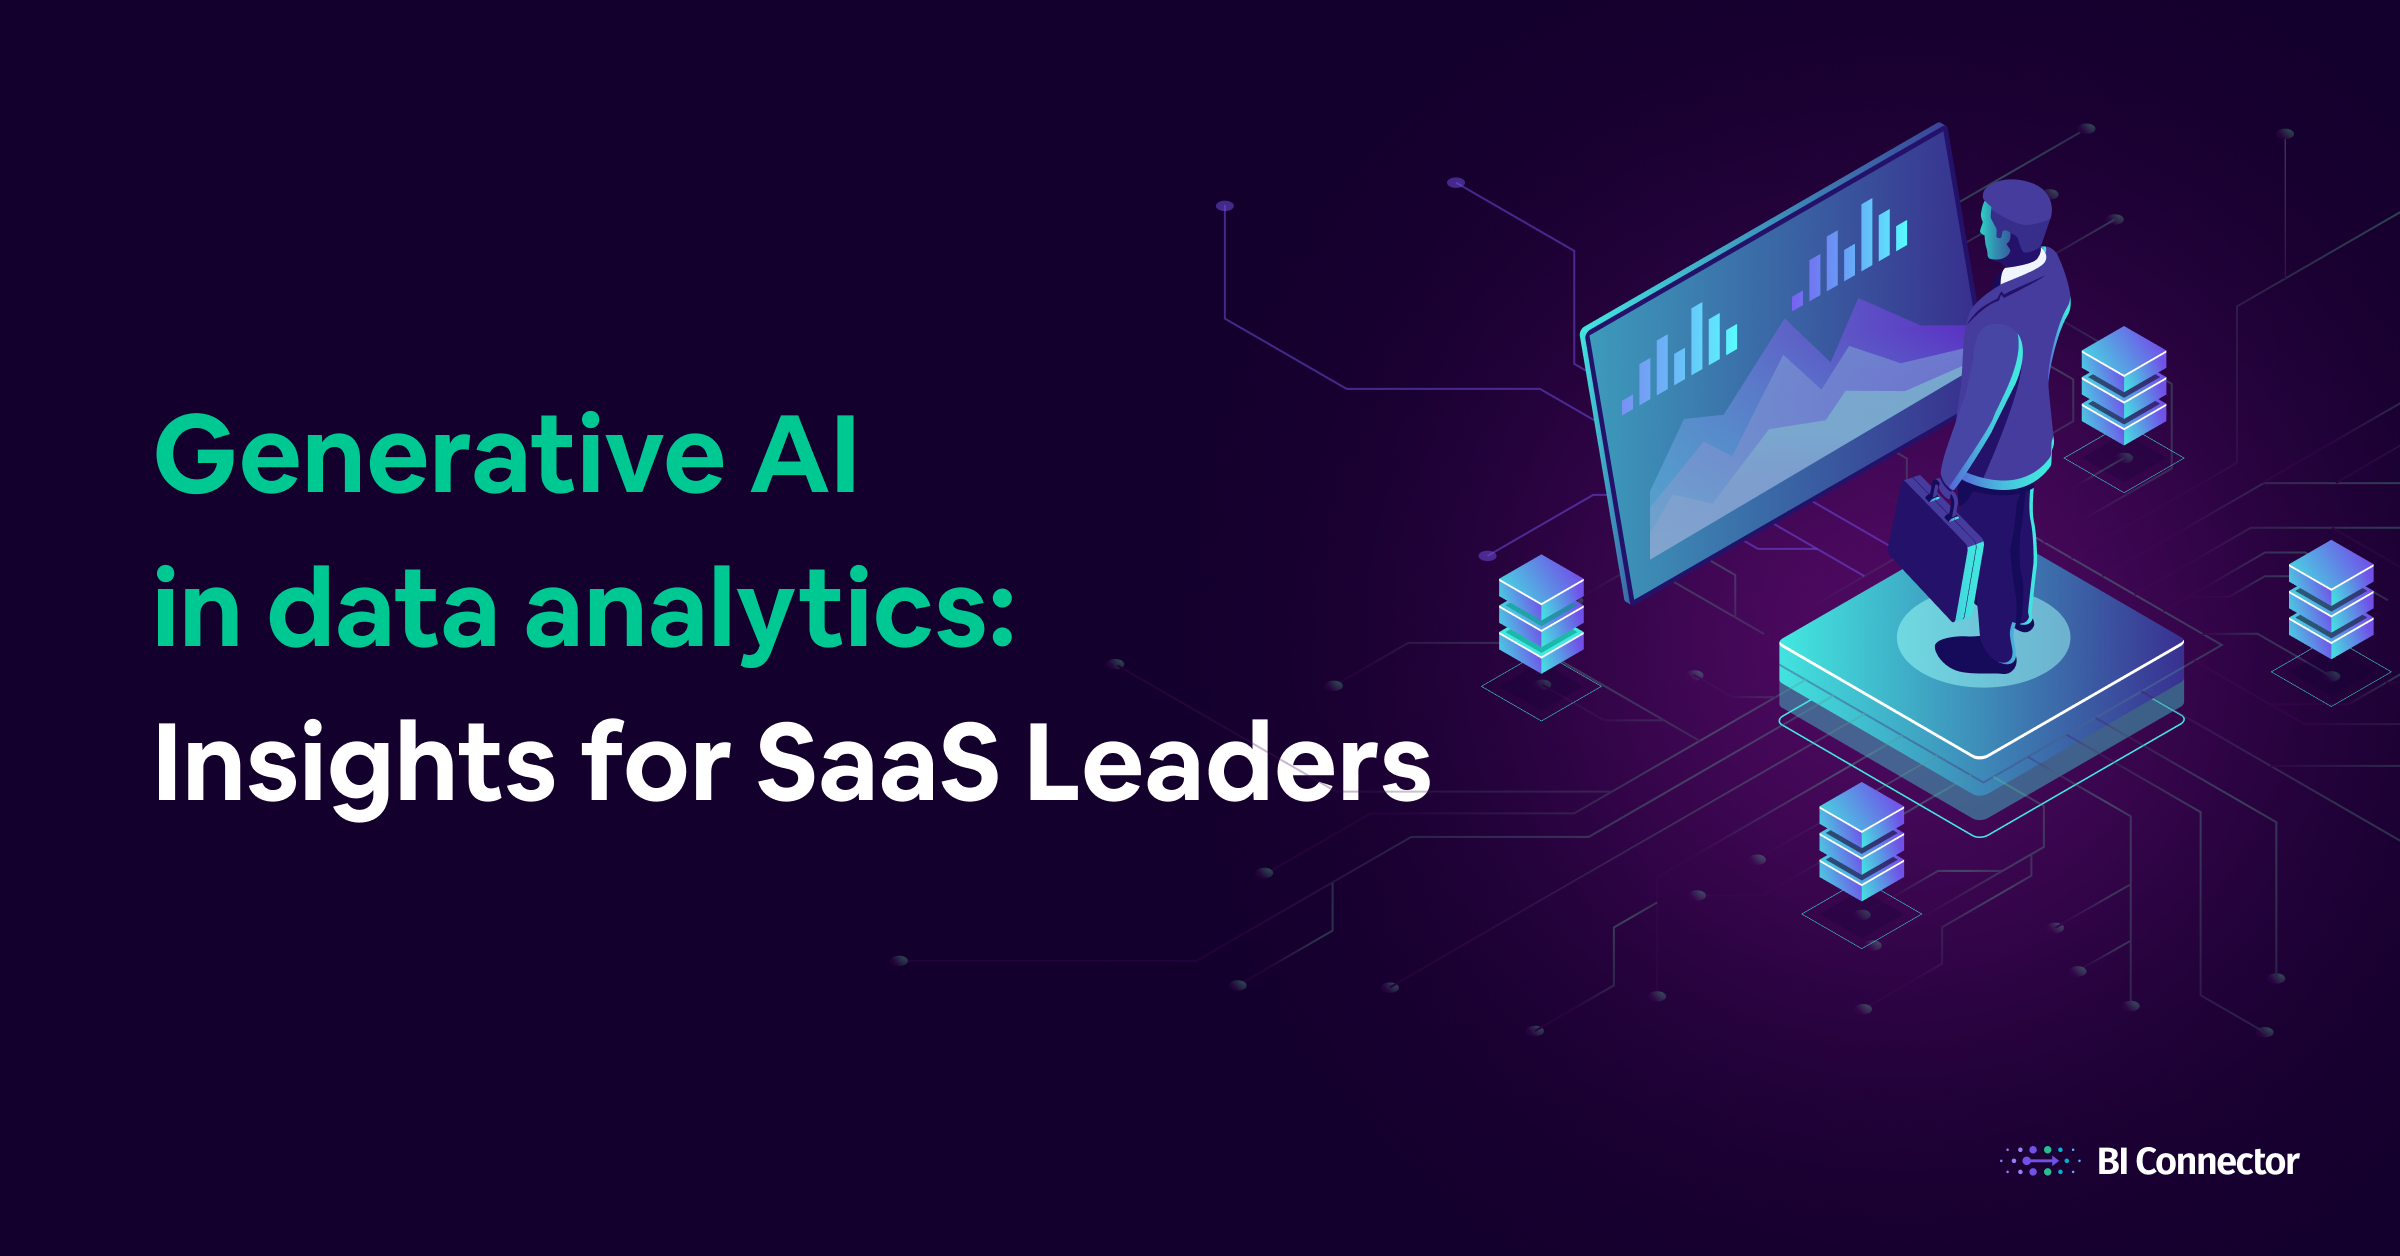 Generative AI in data analytics: Insights for SaaS leaders